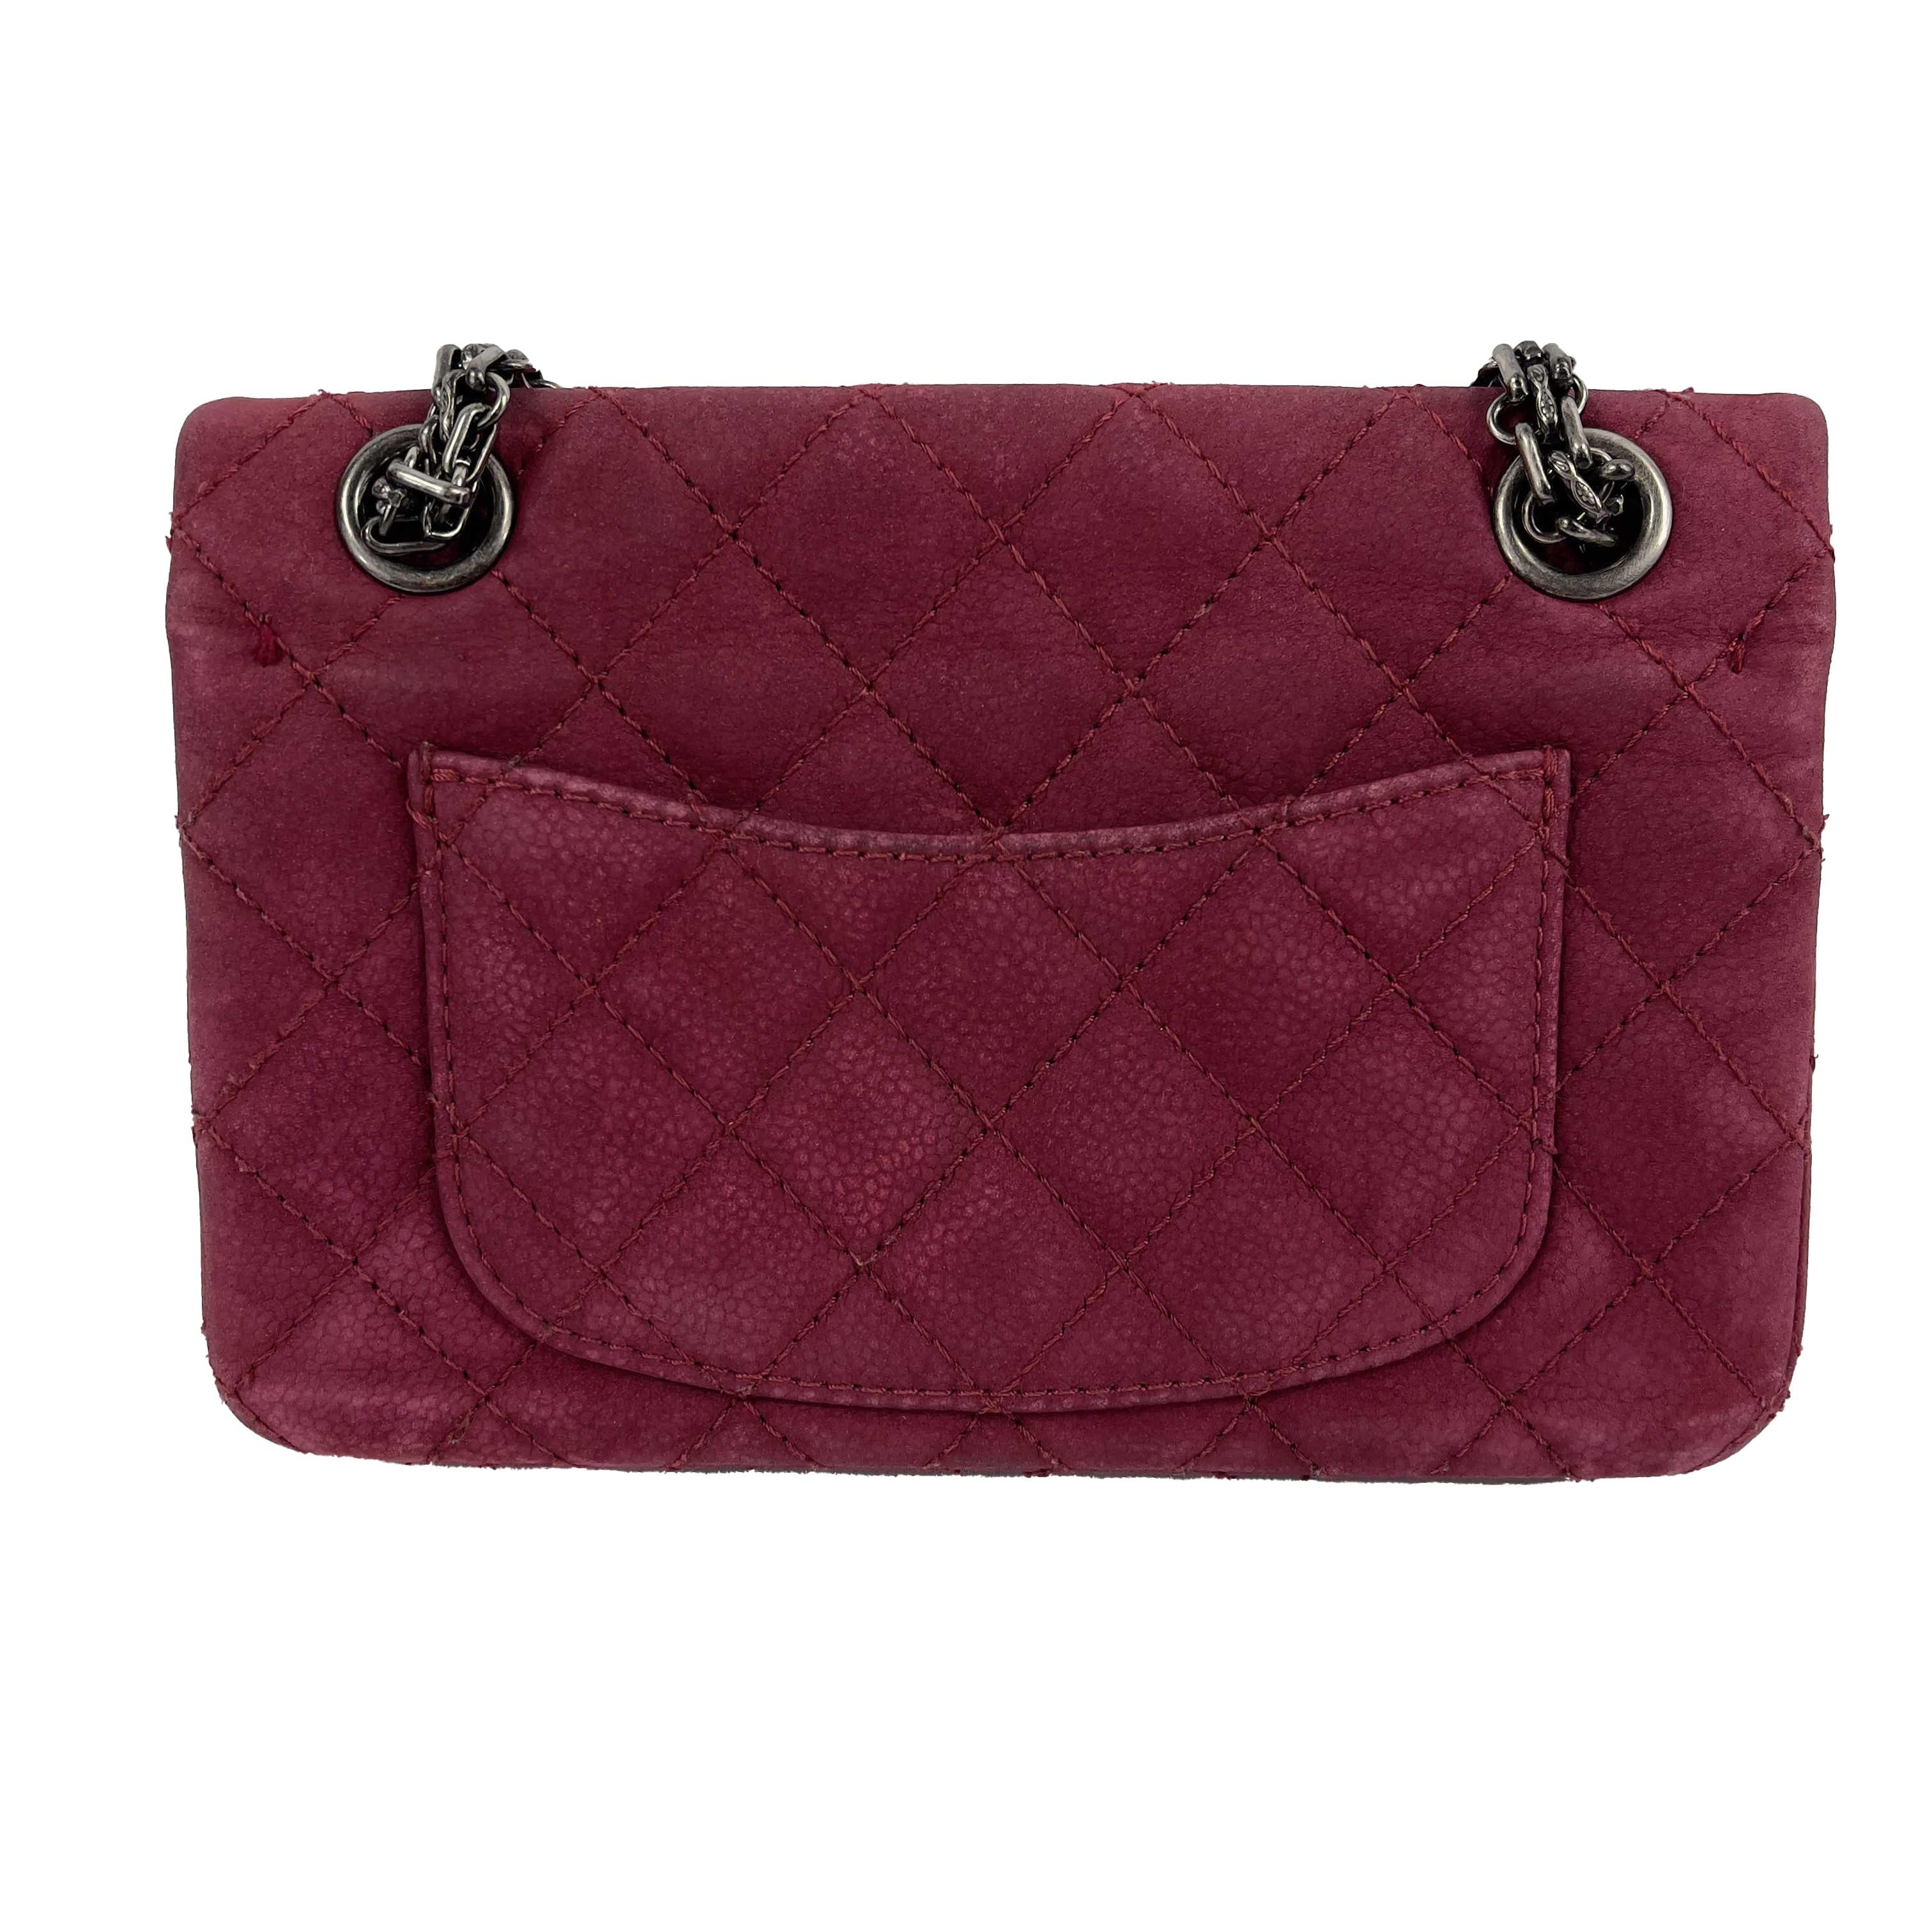 CHANEL- Matte Caviar 2.55 Reissue - Diamond Quilted Mini Raspberry Crossbody 

Description

This shoulder bag is crafted of diamond quilted matte caviar leather in a raspberry.
Featuring antiqued ruthenium reissue chain-link shoulder straps and a